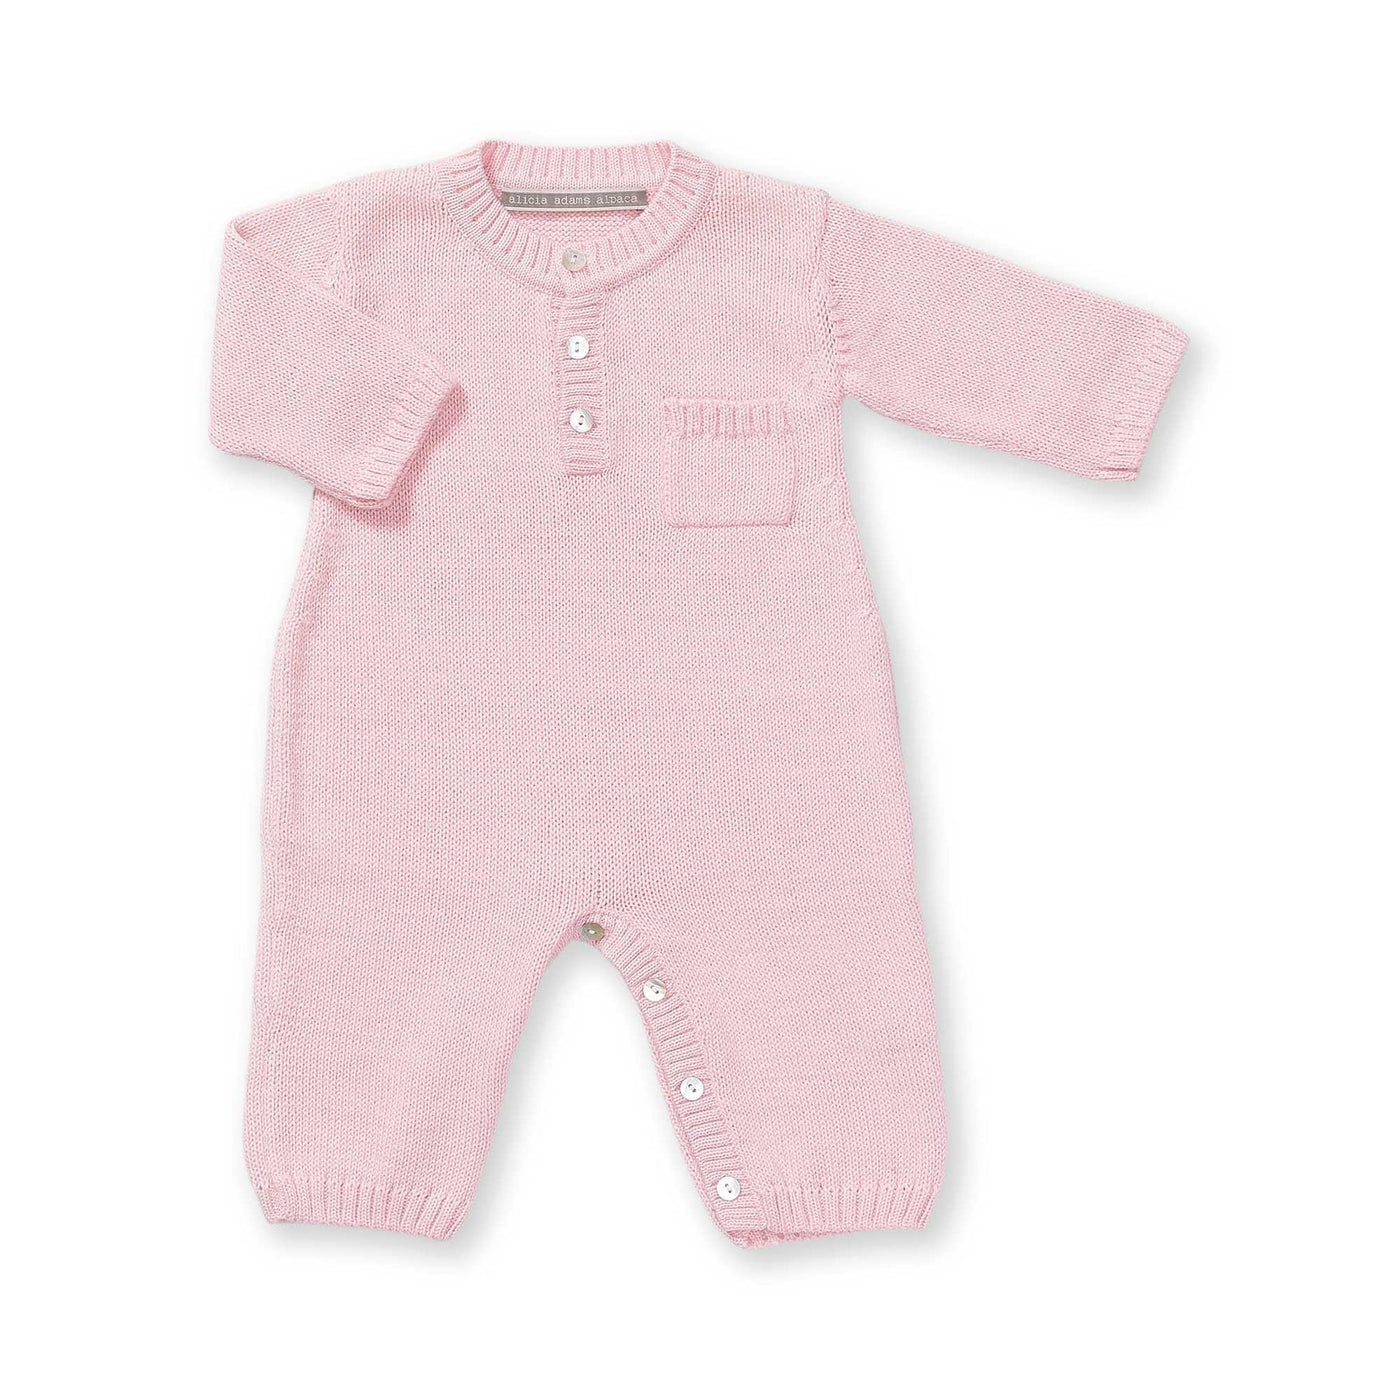 ALICIA ADAMS ONESIE ALEGRA (Available in Sizes and Colors)